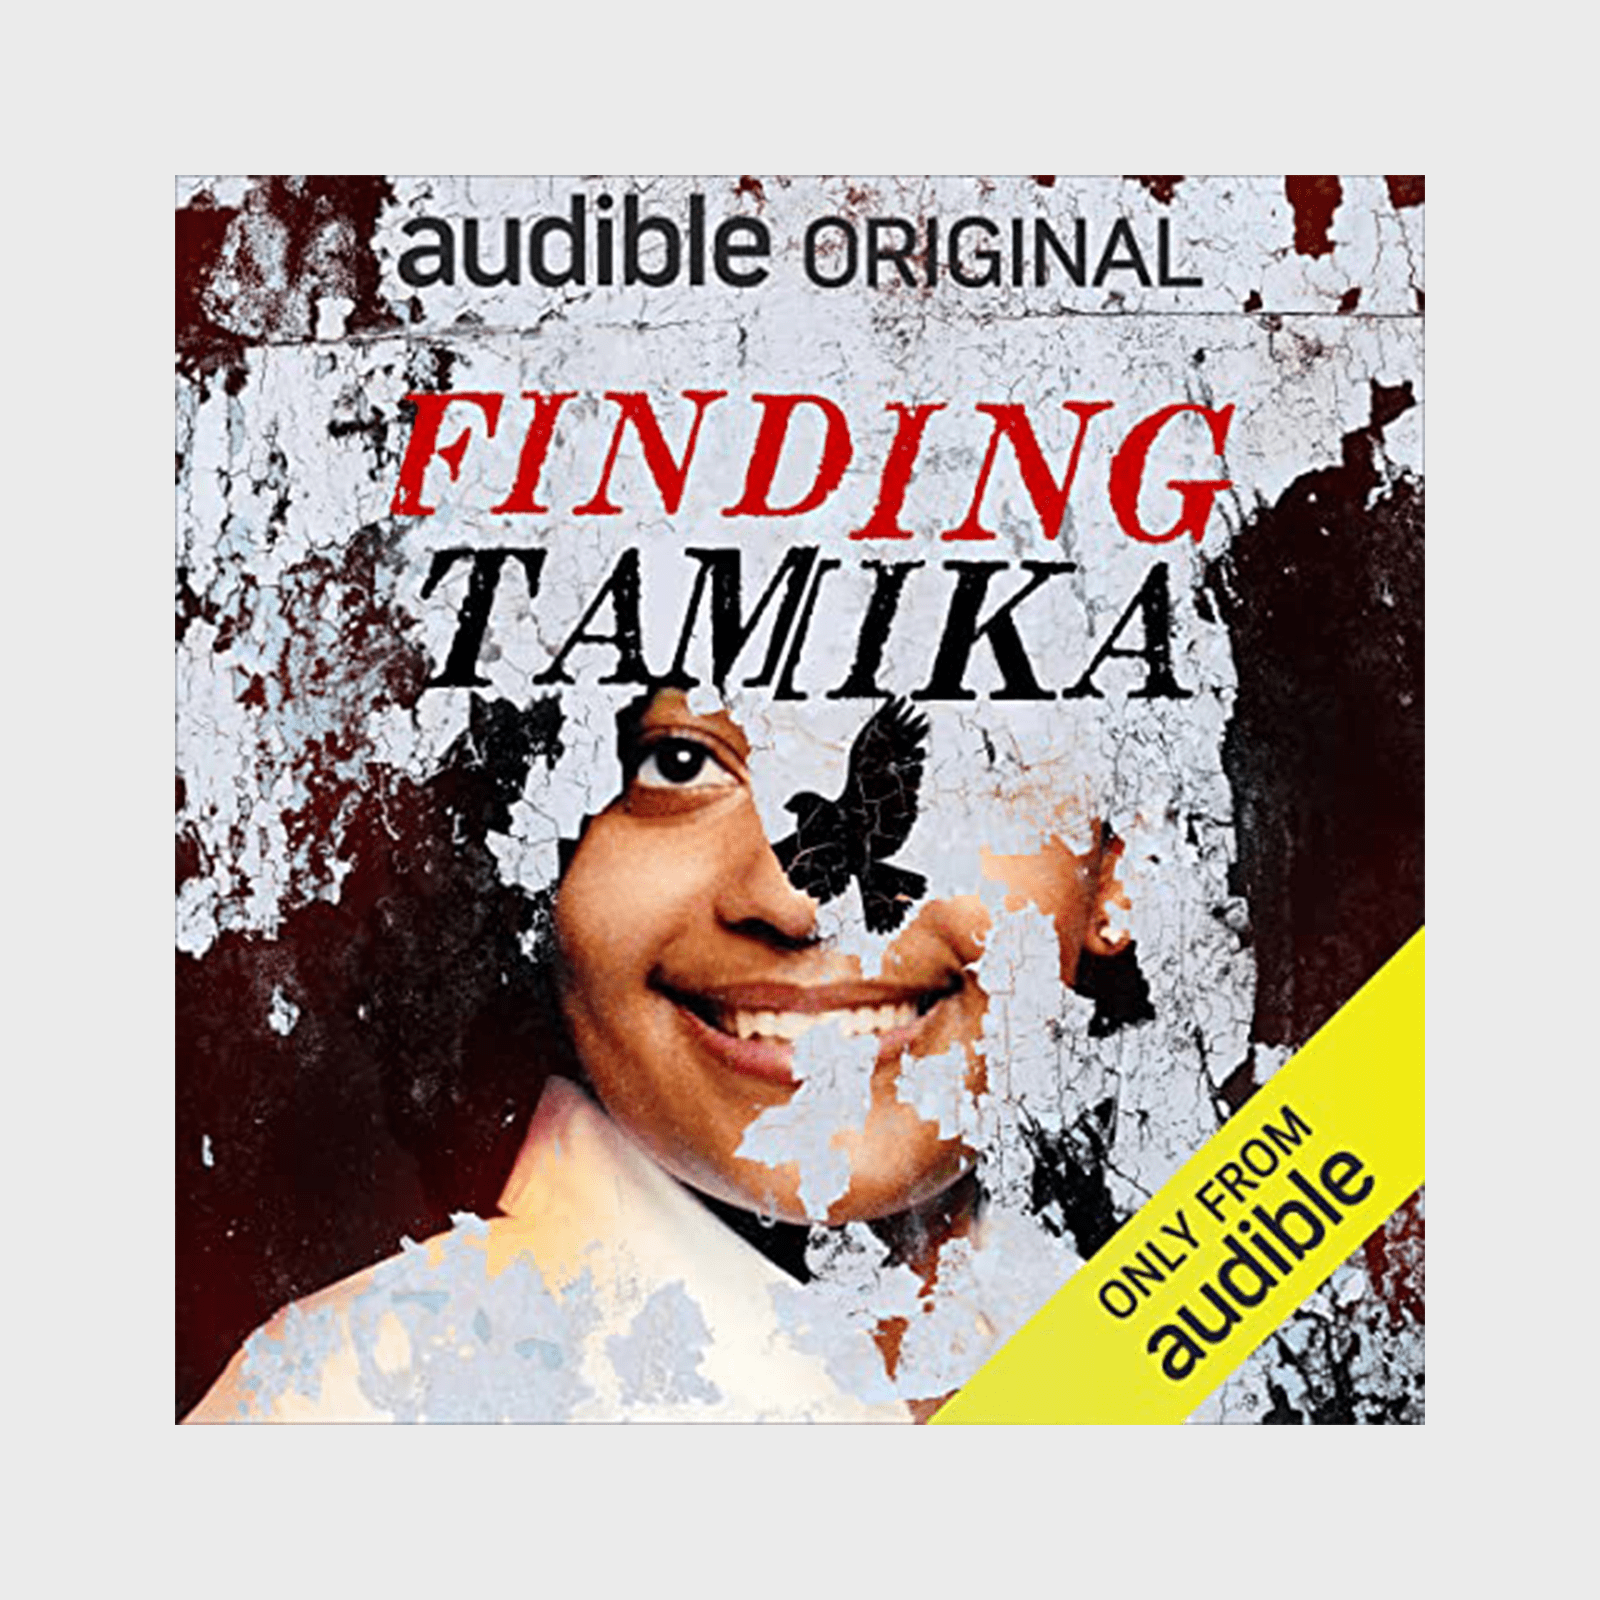 <h3 class=""><strong><em>Finding Tamika</em> by Erika Alexander, Kevin Hart, Charlamagne Tha God, Ben Arnon, Rebkah Howard, David Person, and James T. Green</strong></h3> <p>In 2004, 25-year-old Tamika Huston disappeared. Her case, like so many others involving people of color, received little to no media attention. Actress and narrator Erika Alexander teamed up with Kevin Hart, Charlamagne Tha God, and a team of other talented people to produce this true crime <a href="https://www.amazon.com/Audible-Finding-Tamika/dp/B09R5FT6B7/" rel="noopener noreferrer">Audible original</a> in hopes of changing a system in which missing Black girls have been largely ignored. In this powerful and important audiobook, readers will hear chilling details about Huston's case along with eerie, beyond-the-grave commentary from Tamika herself. This is one of the best <a href="https://www.rd.com/list/best-true-crime-books/" rel="noopener noreferrer">true crime books</a> that's only in audiobook form.</p> <p class="listicle-page__cta-button-shop"><a class="shop-btn" href="https://www.amazon.com/Audible-Finding-Tamika/dp/B09R5FT6B7/">Shop Now</a></p>